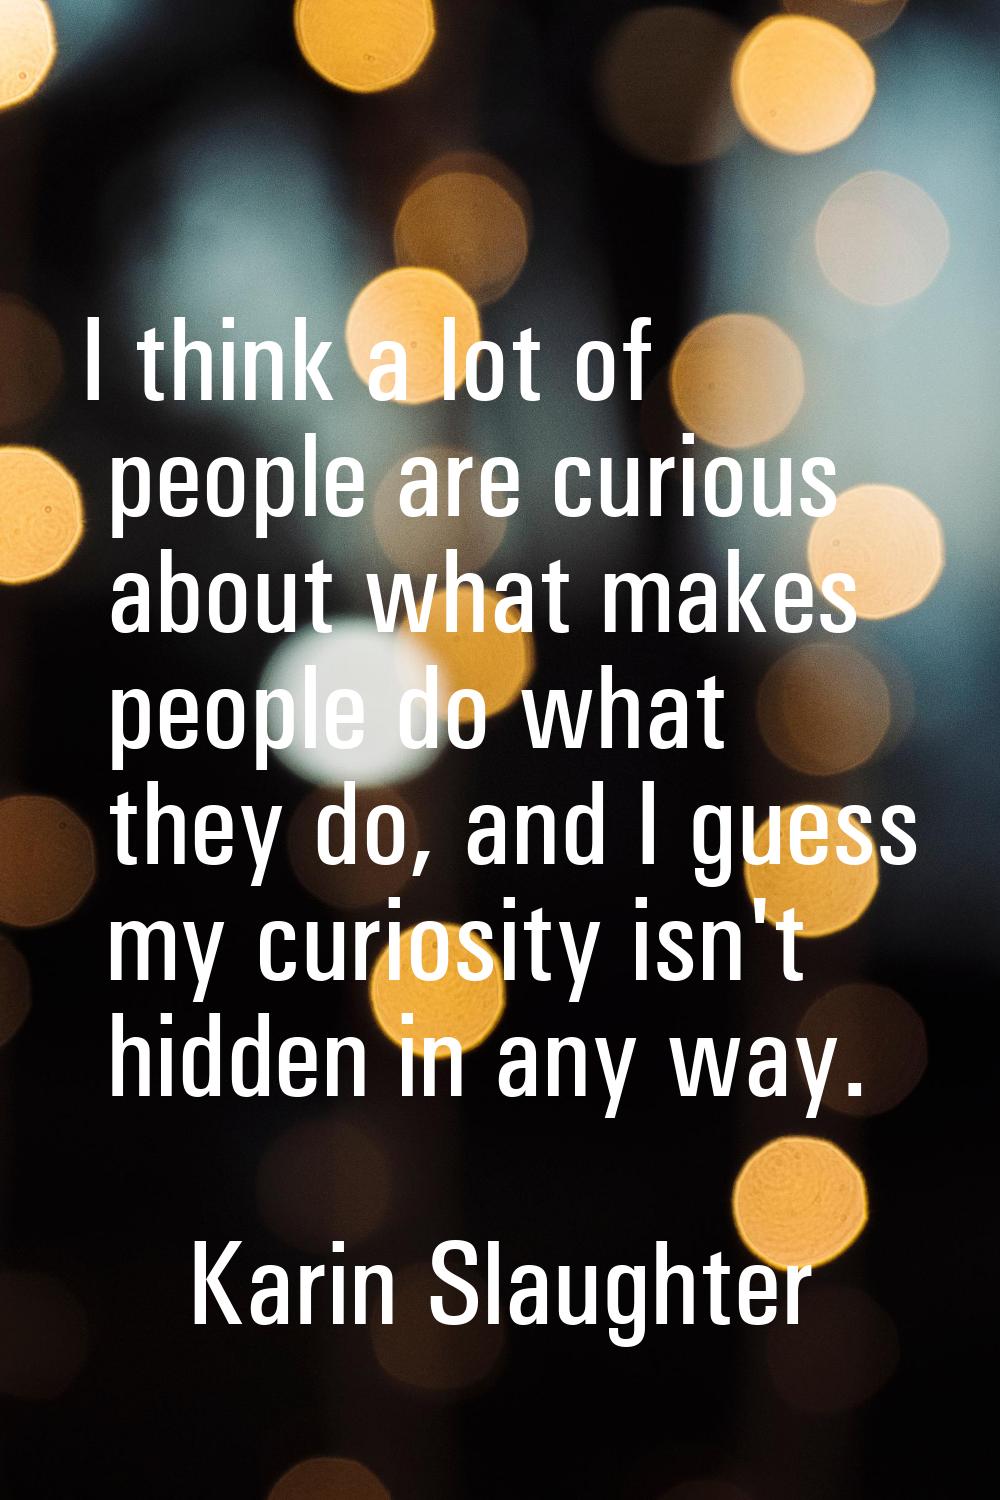 I think a lot of people are curious about what makes people do what they do, and I guess my curiosi